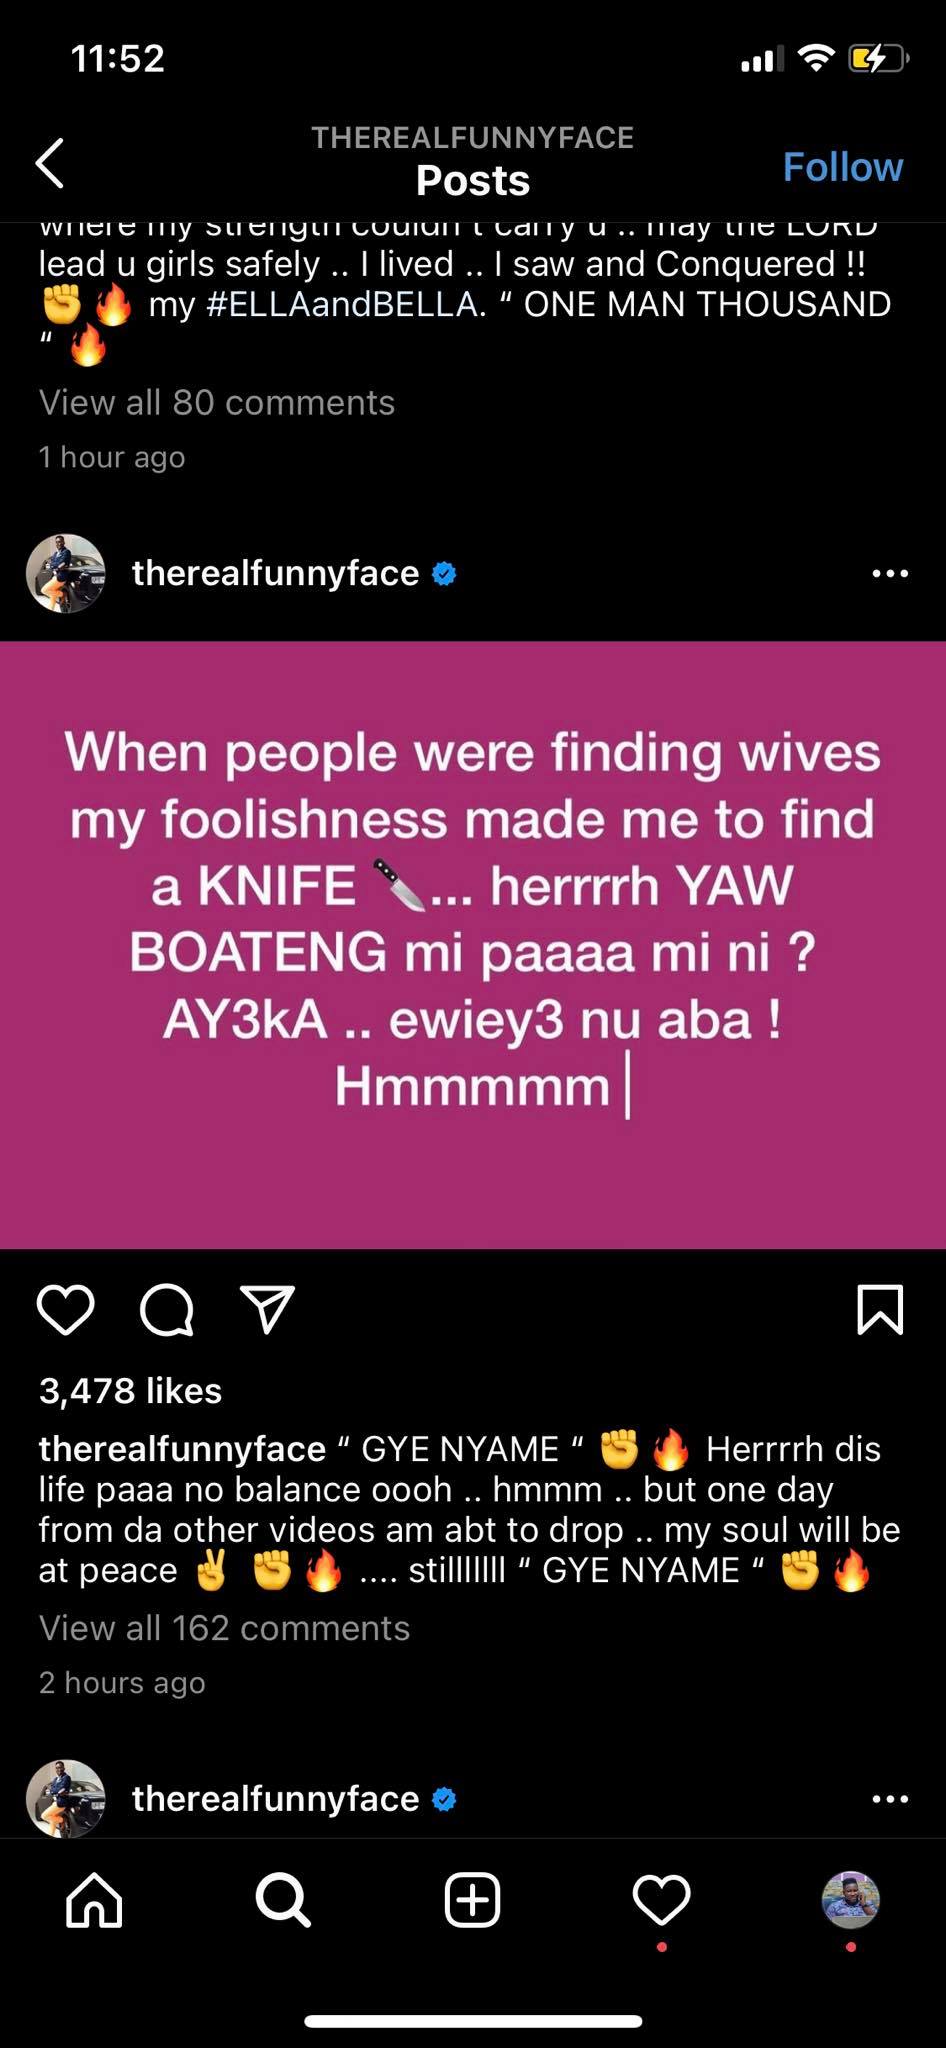 Funny Face post about his wife